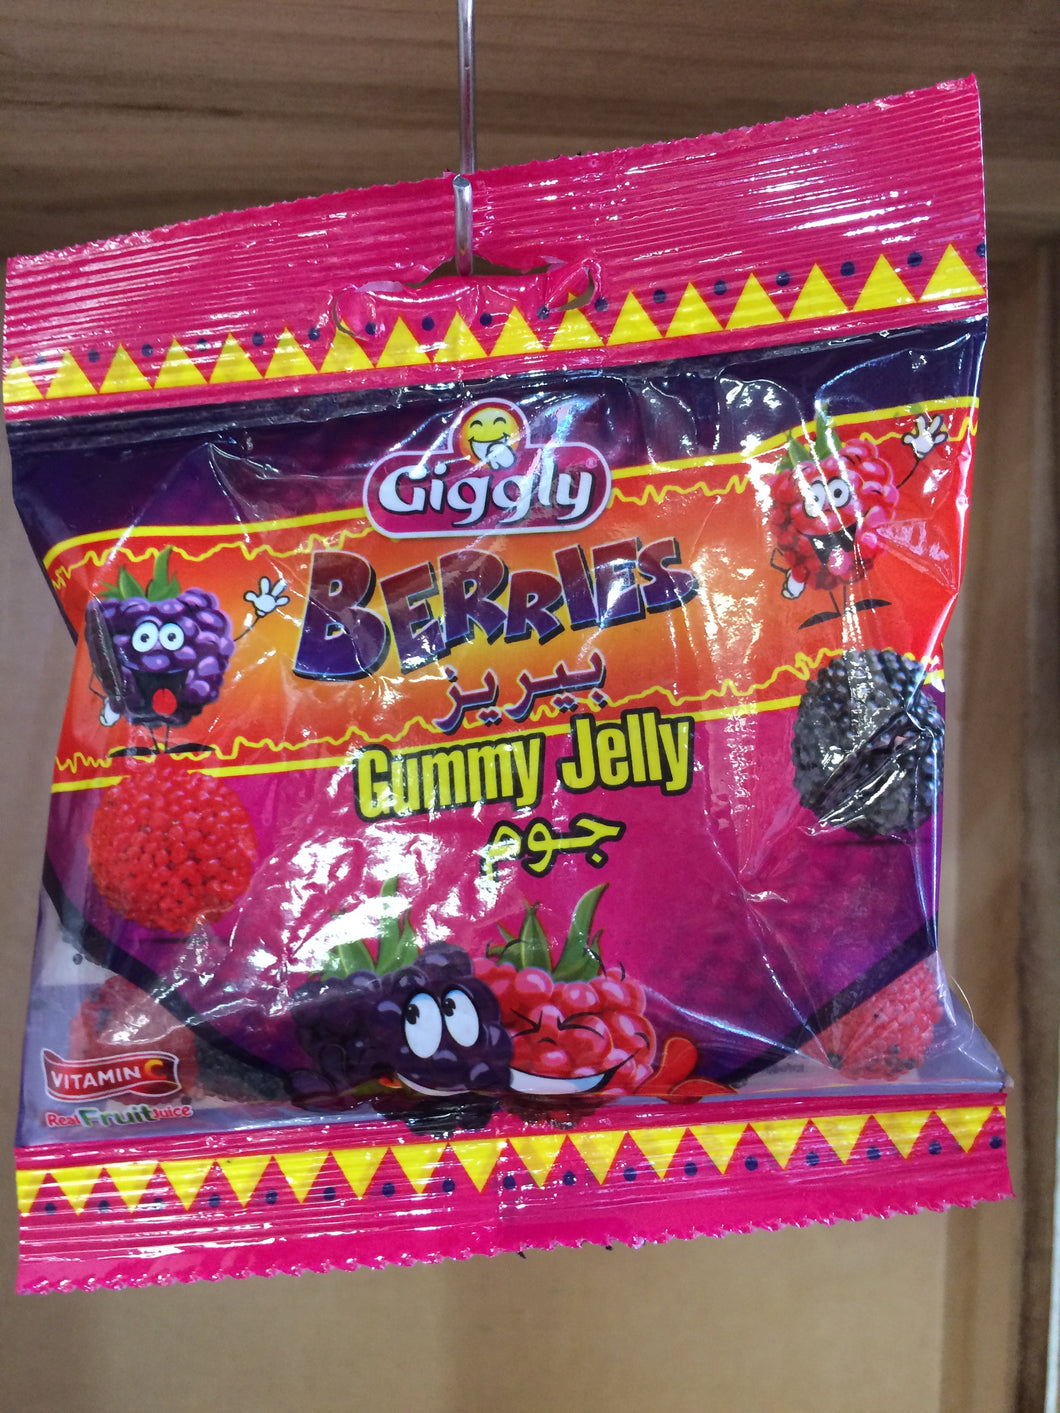 Giggly Berries Gummy Jelly 30g Bag